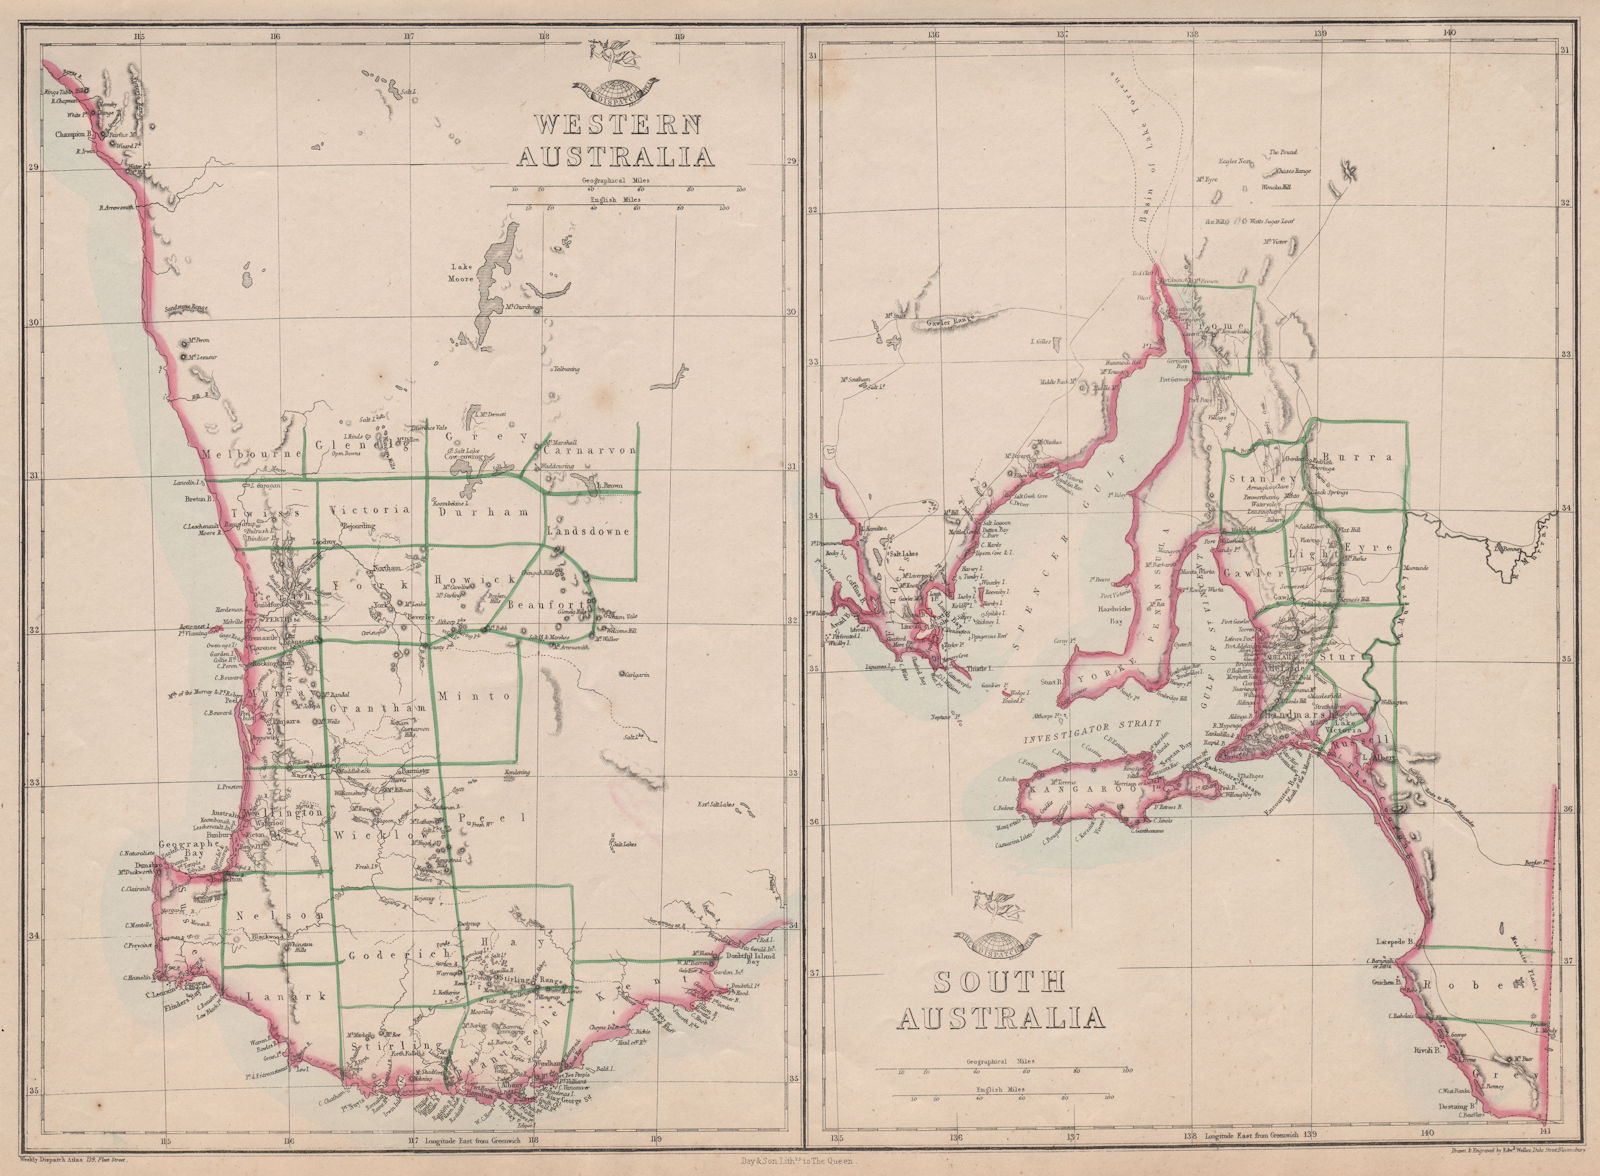 Associate Product WESTERN & SOUTH AUSTRALIA. Land Divisions. Perth Adelaide. WELLER 1862 old map